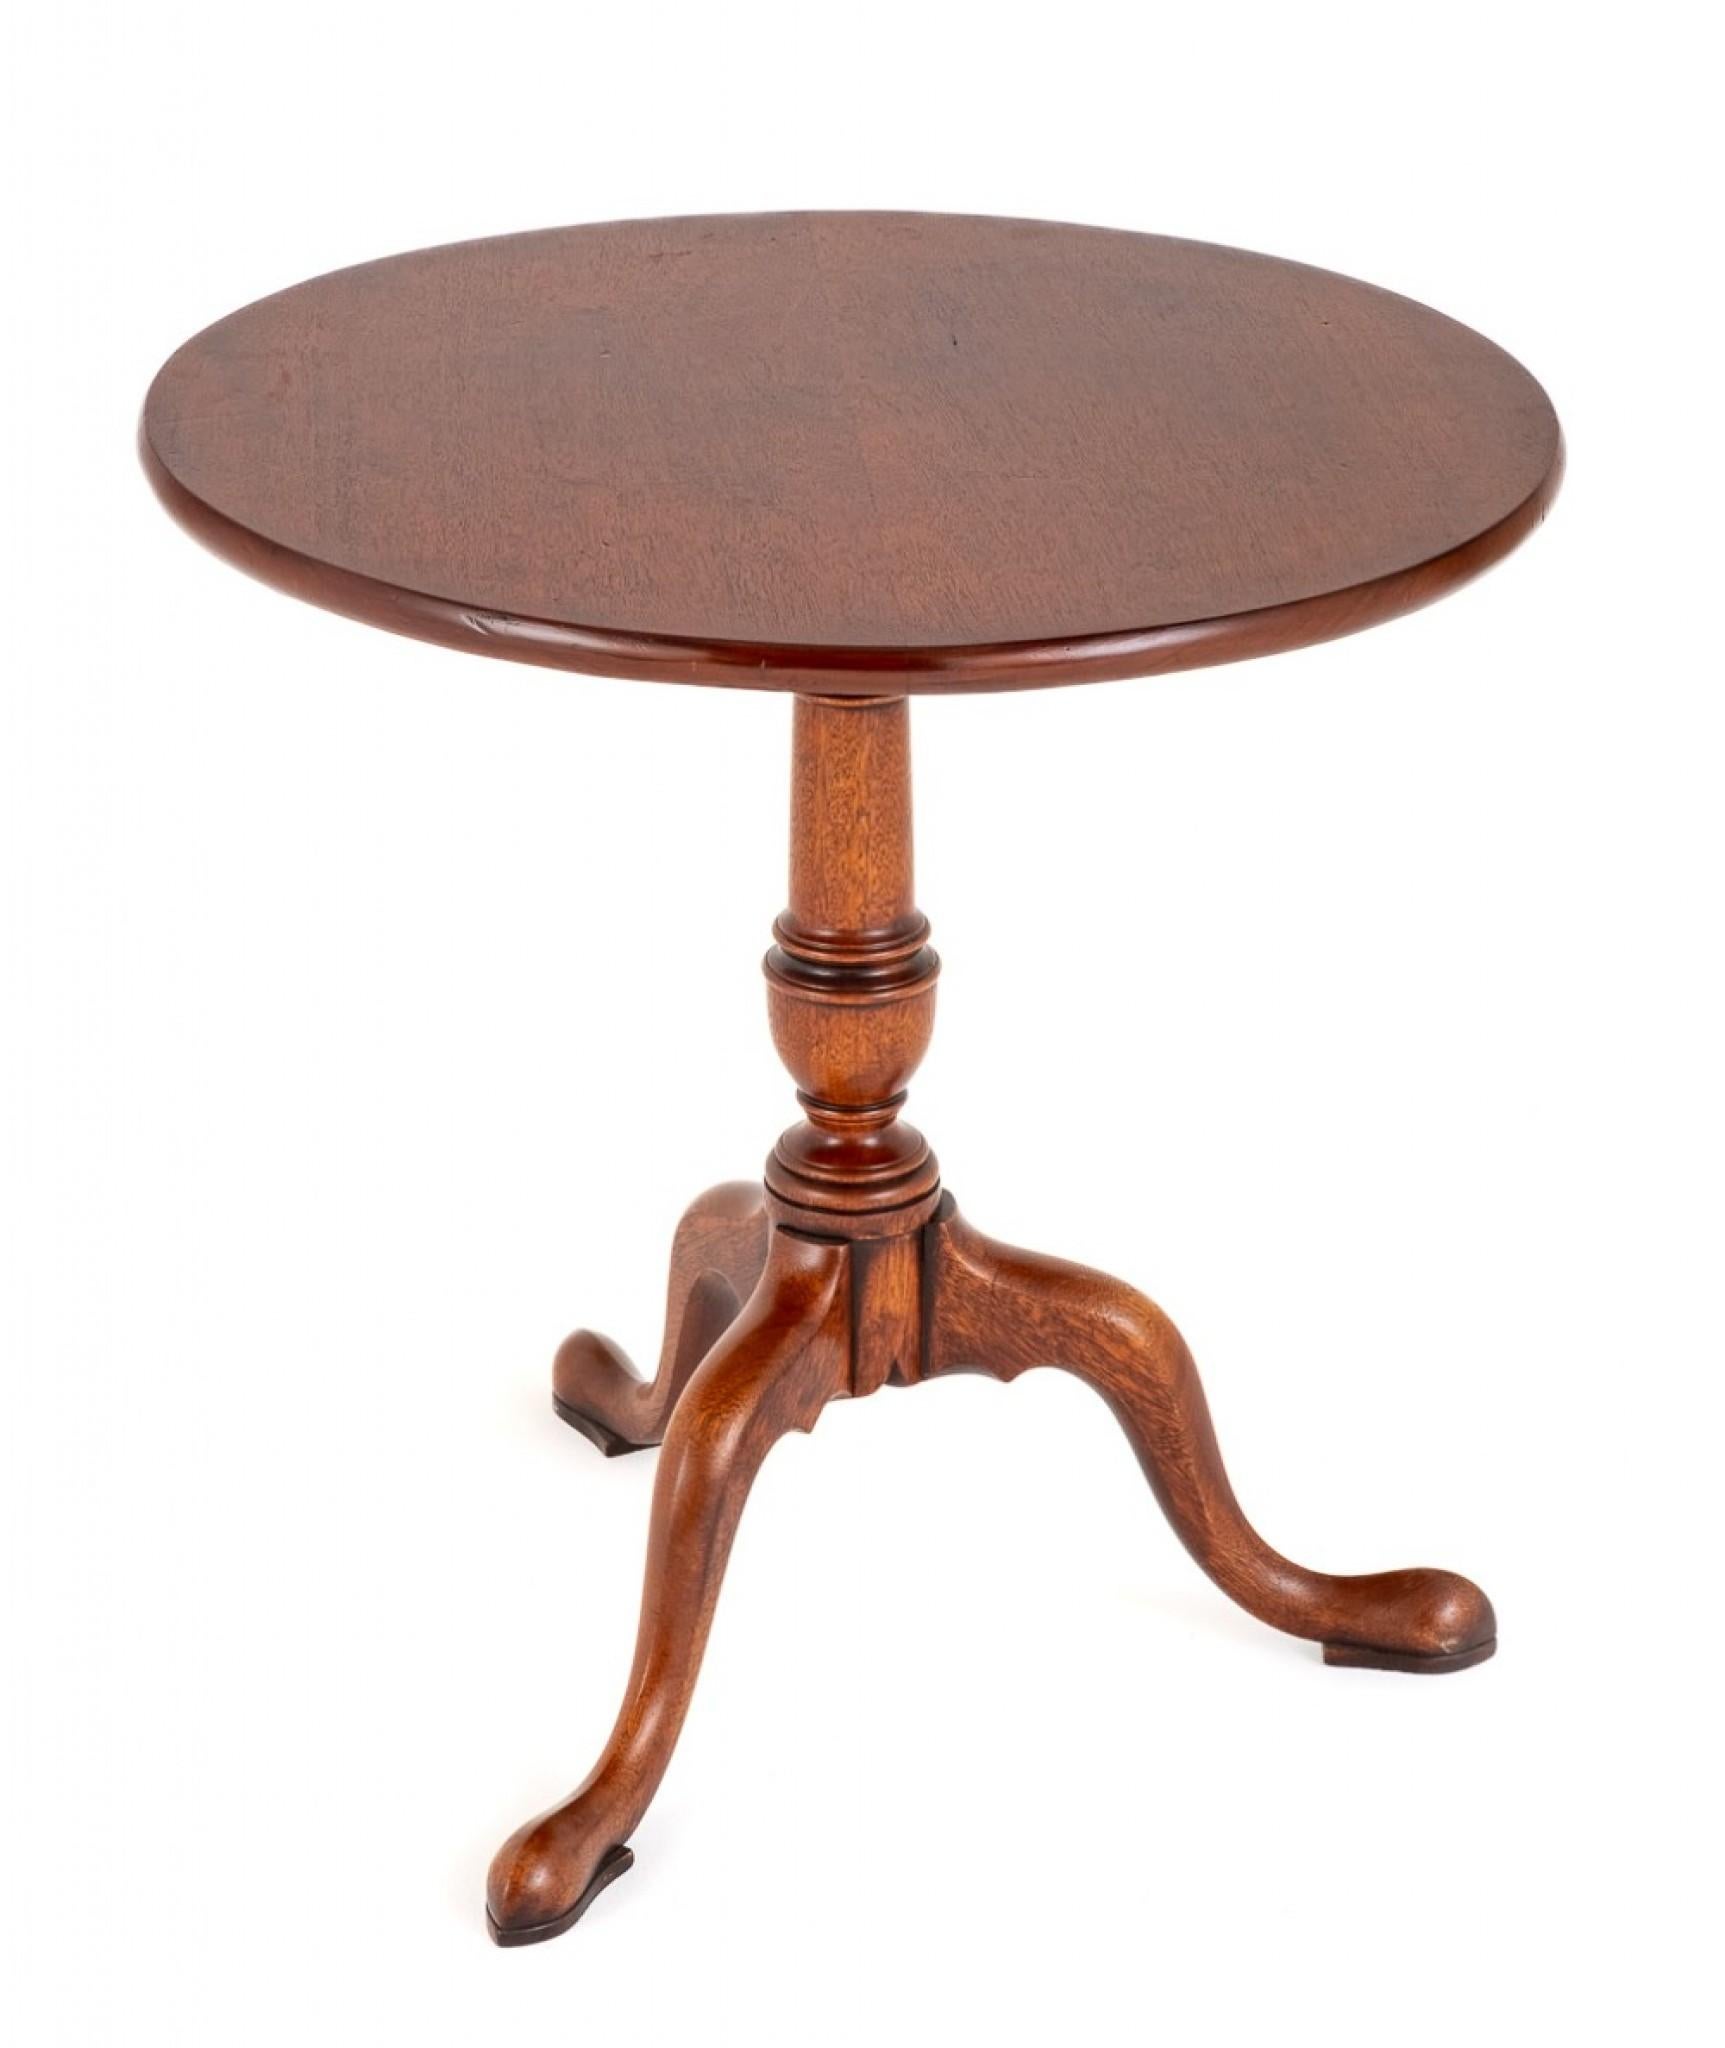 Georgian Mahogany wine table.
19th century
This wine table stands upon shaped legs with pad feet.
Featuring a ring turned column of classical form and a circular flip top complete with brass clip.
Presented in good condition.